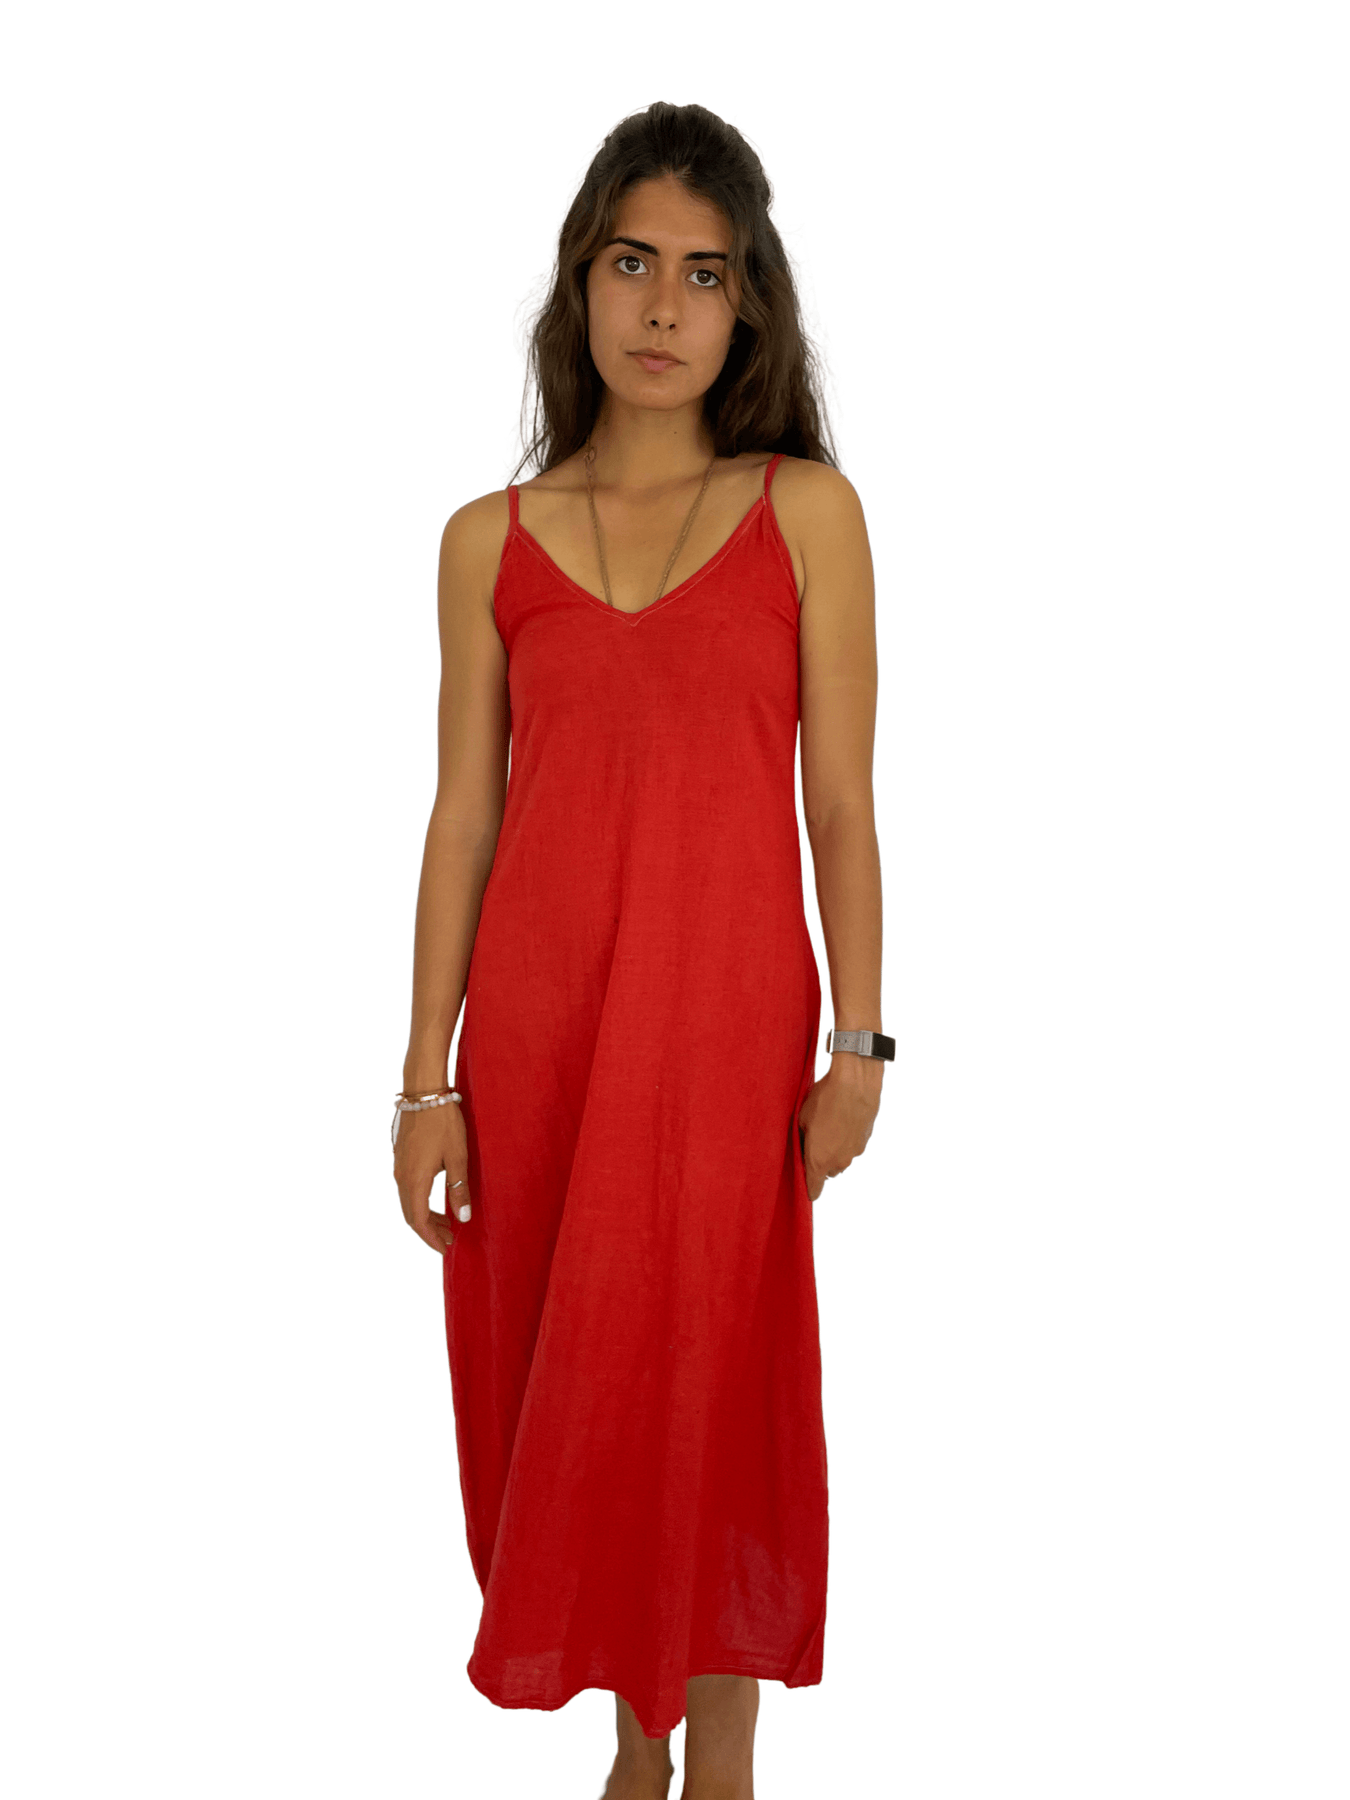 Vegetable Dyed Red Dress